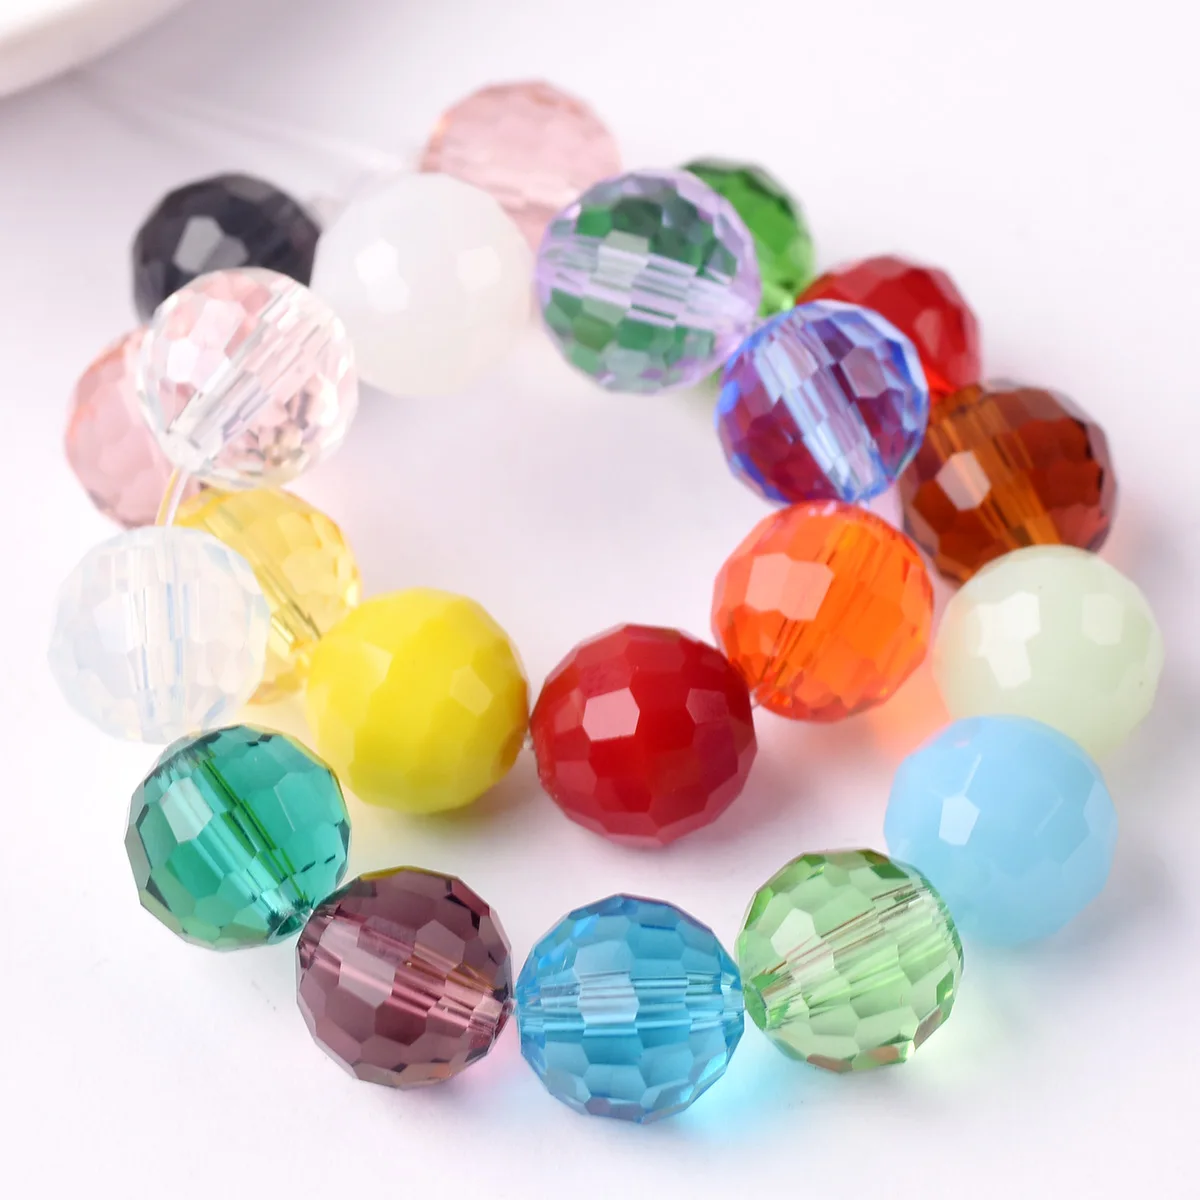 Round 96 Facets 6mm 8mm 10mm 12mm Faceted Crystal Glass Loose Spacer Beads Wholesale Bulk Lot For Jewelry Making Findings